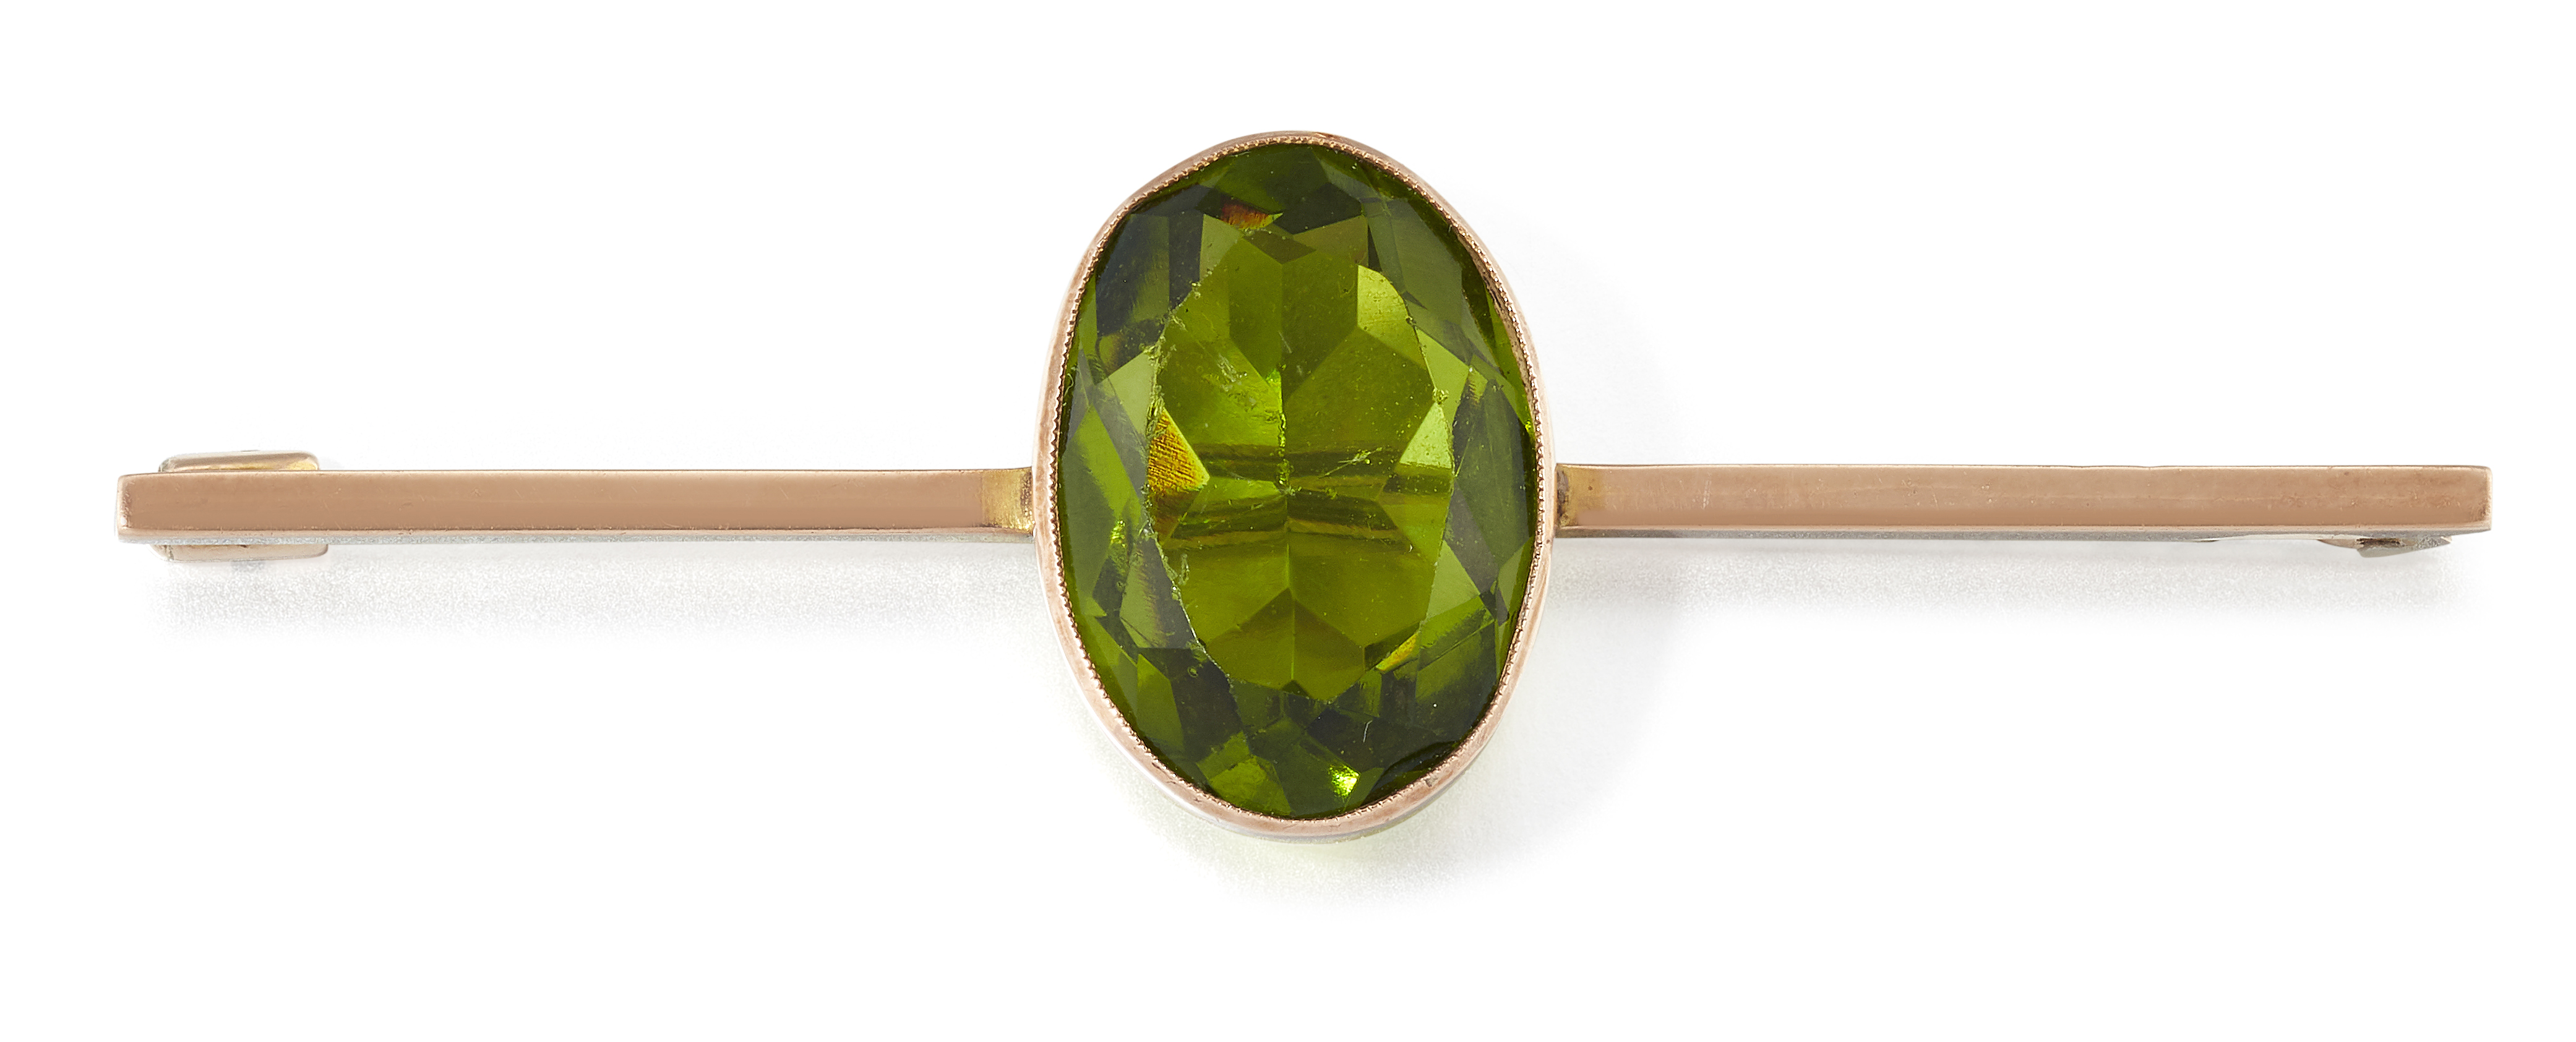 A GREEN PASTE BAR BROOCH - Image 2 of 2